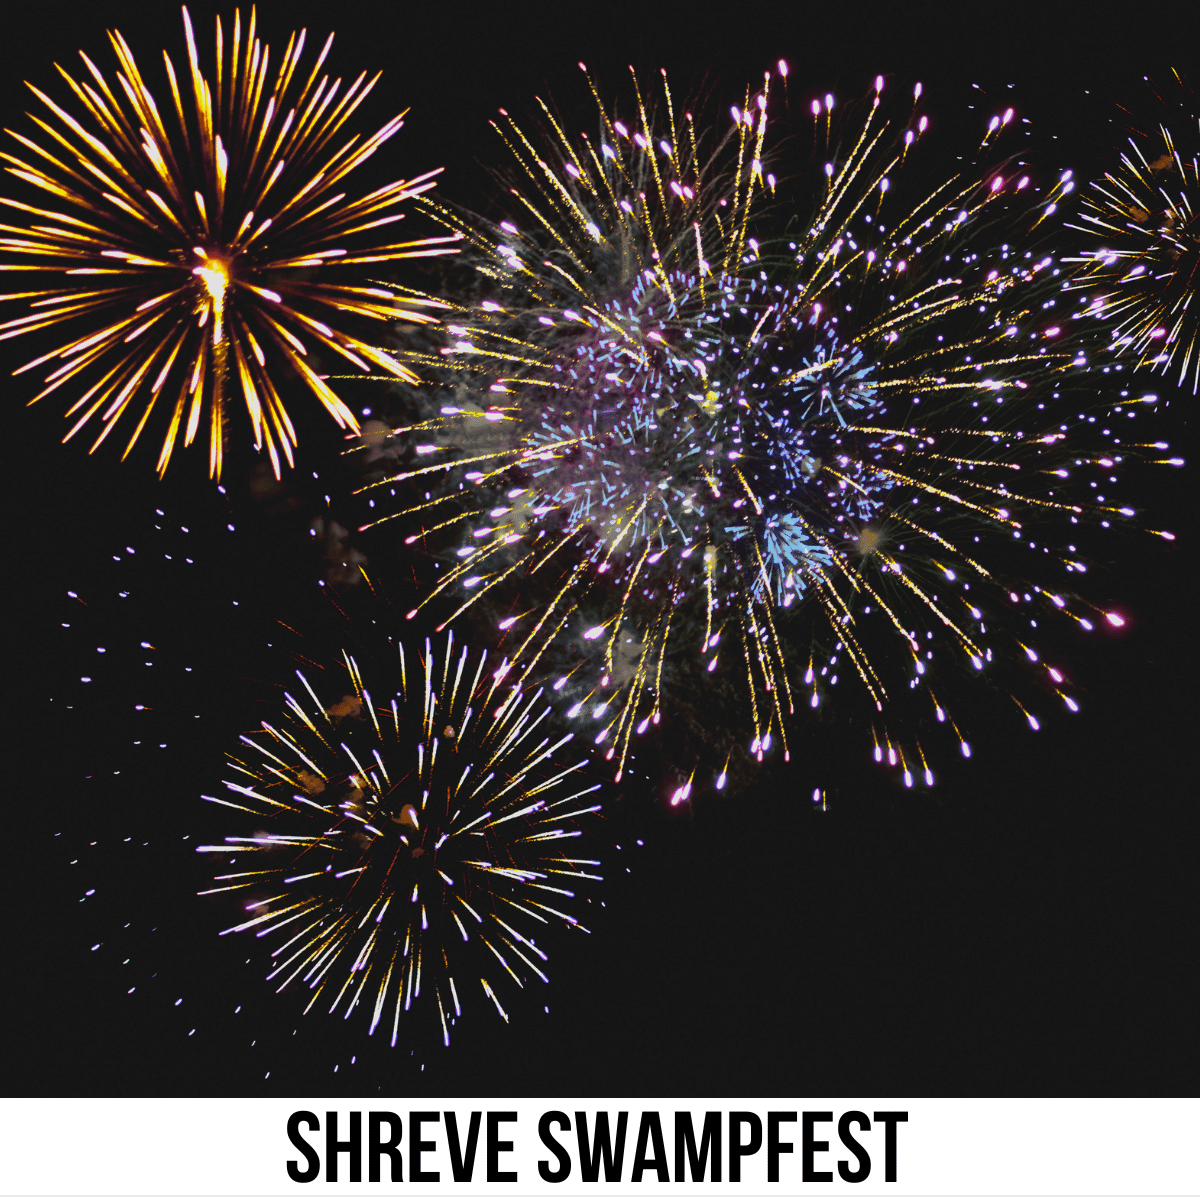 A square image of a photo of fireworks against a black sky background. A white strip across the bottom has text Shreve Swampfest.